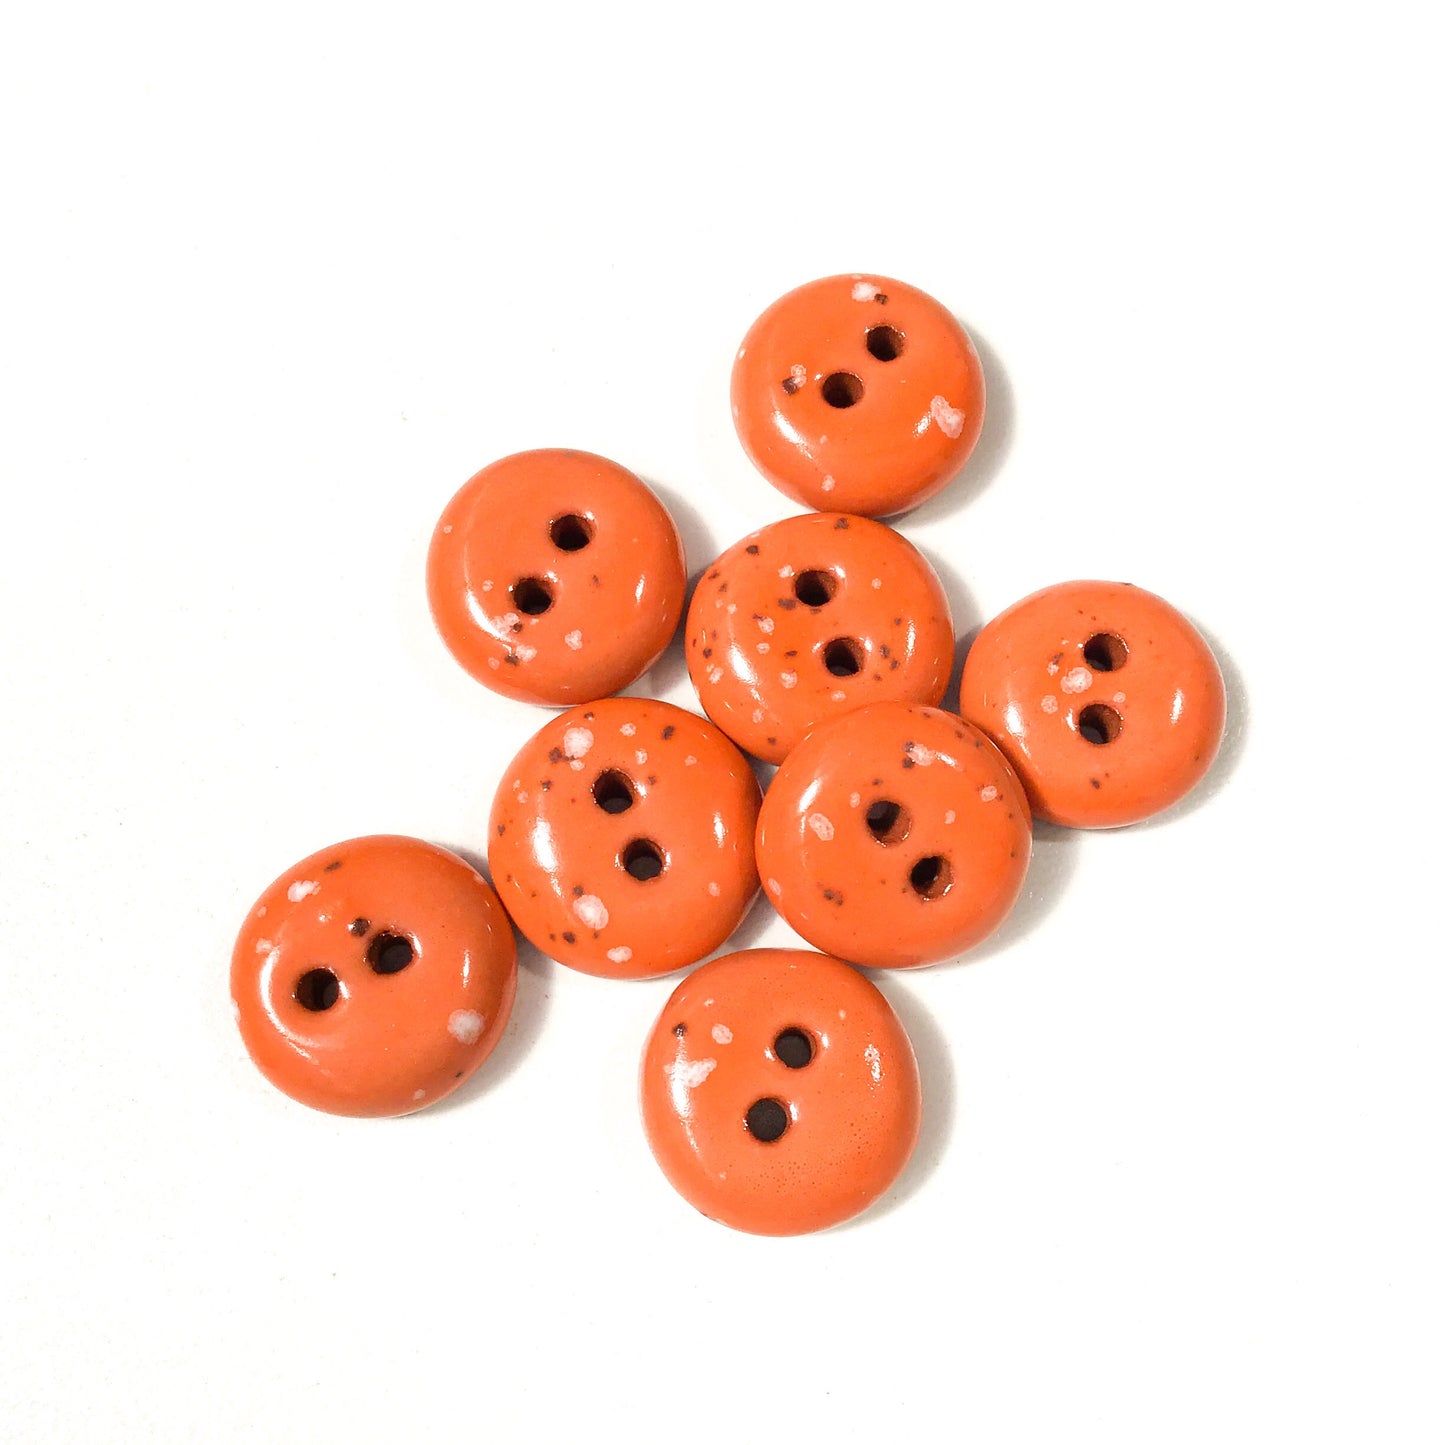 Speckled Orange Clay Buttons - Orange Clay Buttons - 9/16" - 8 Pack